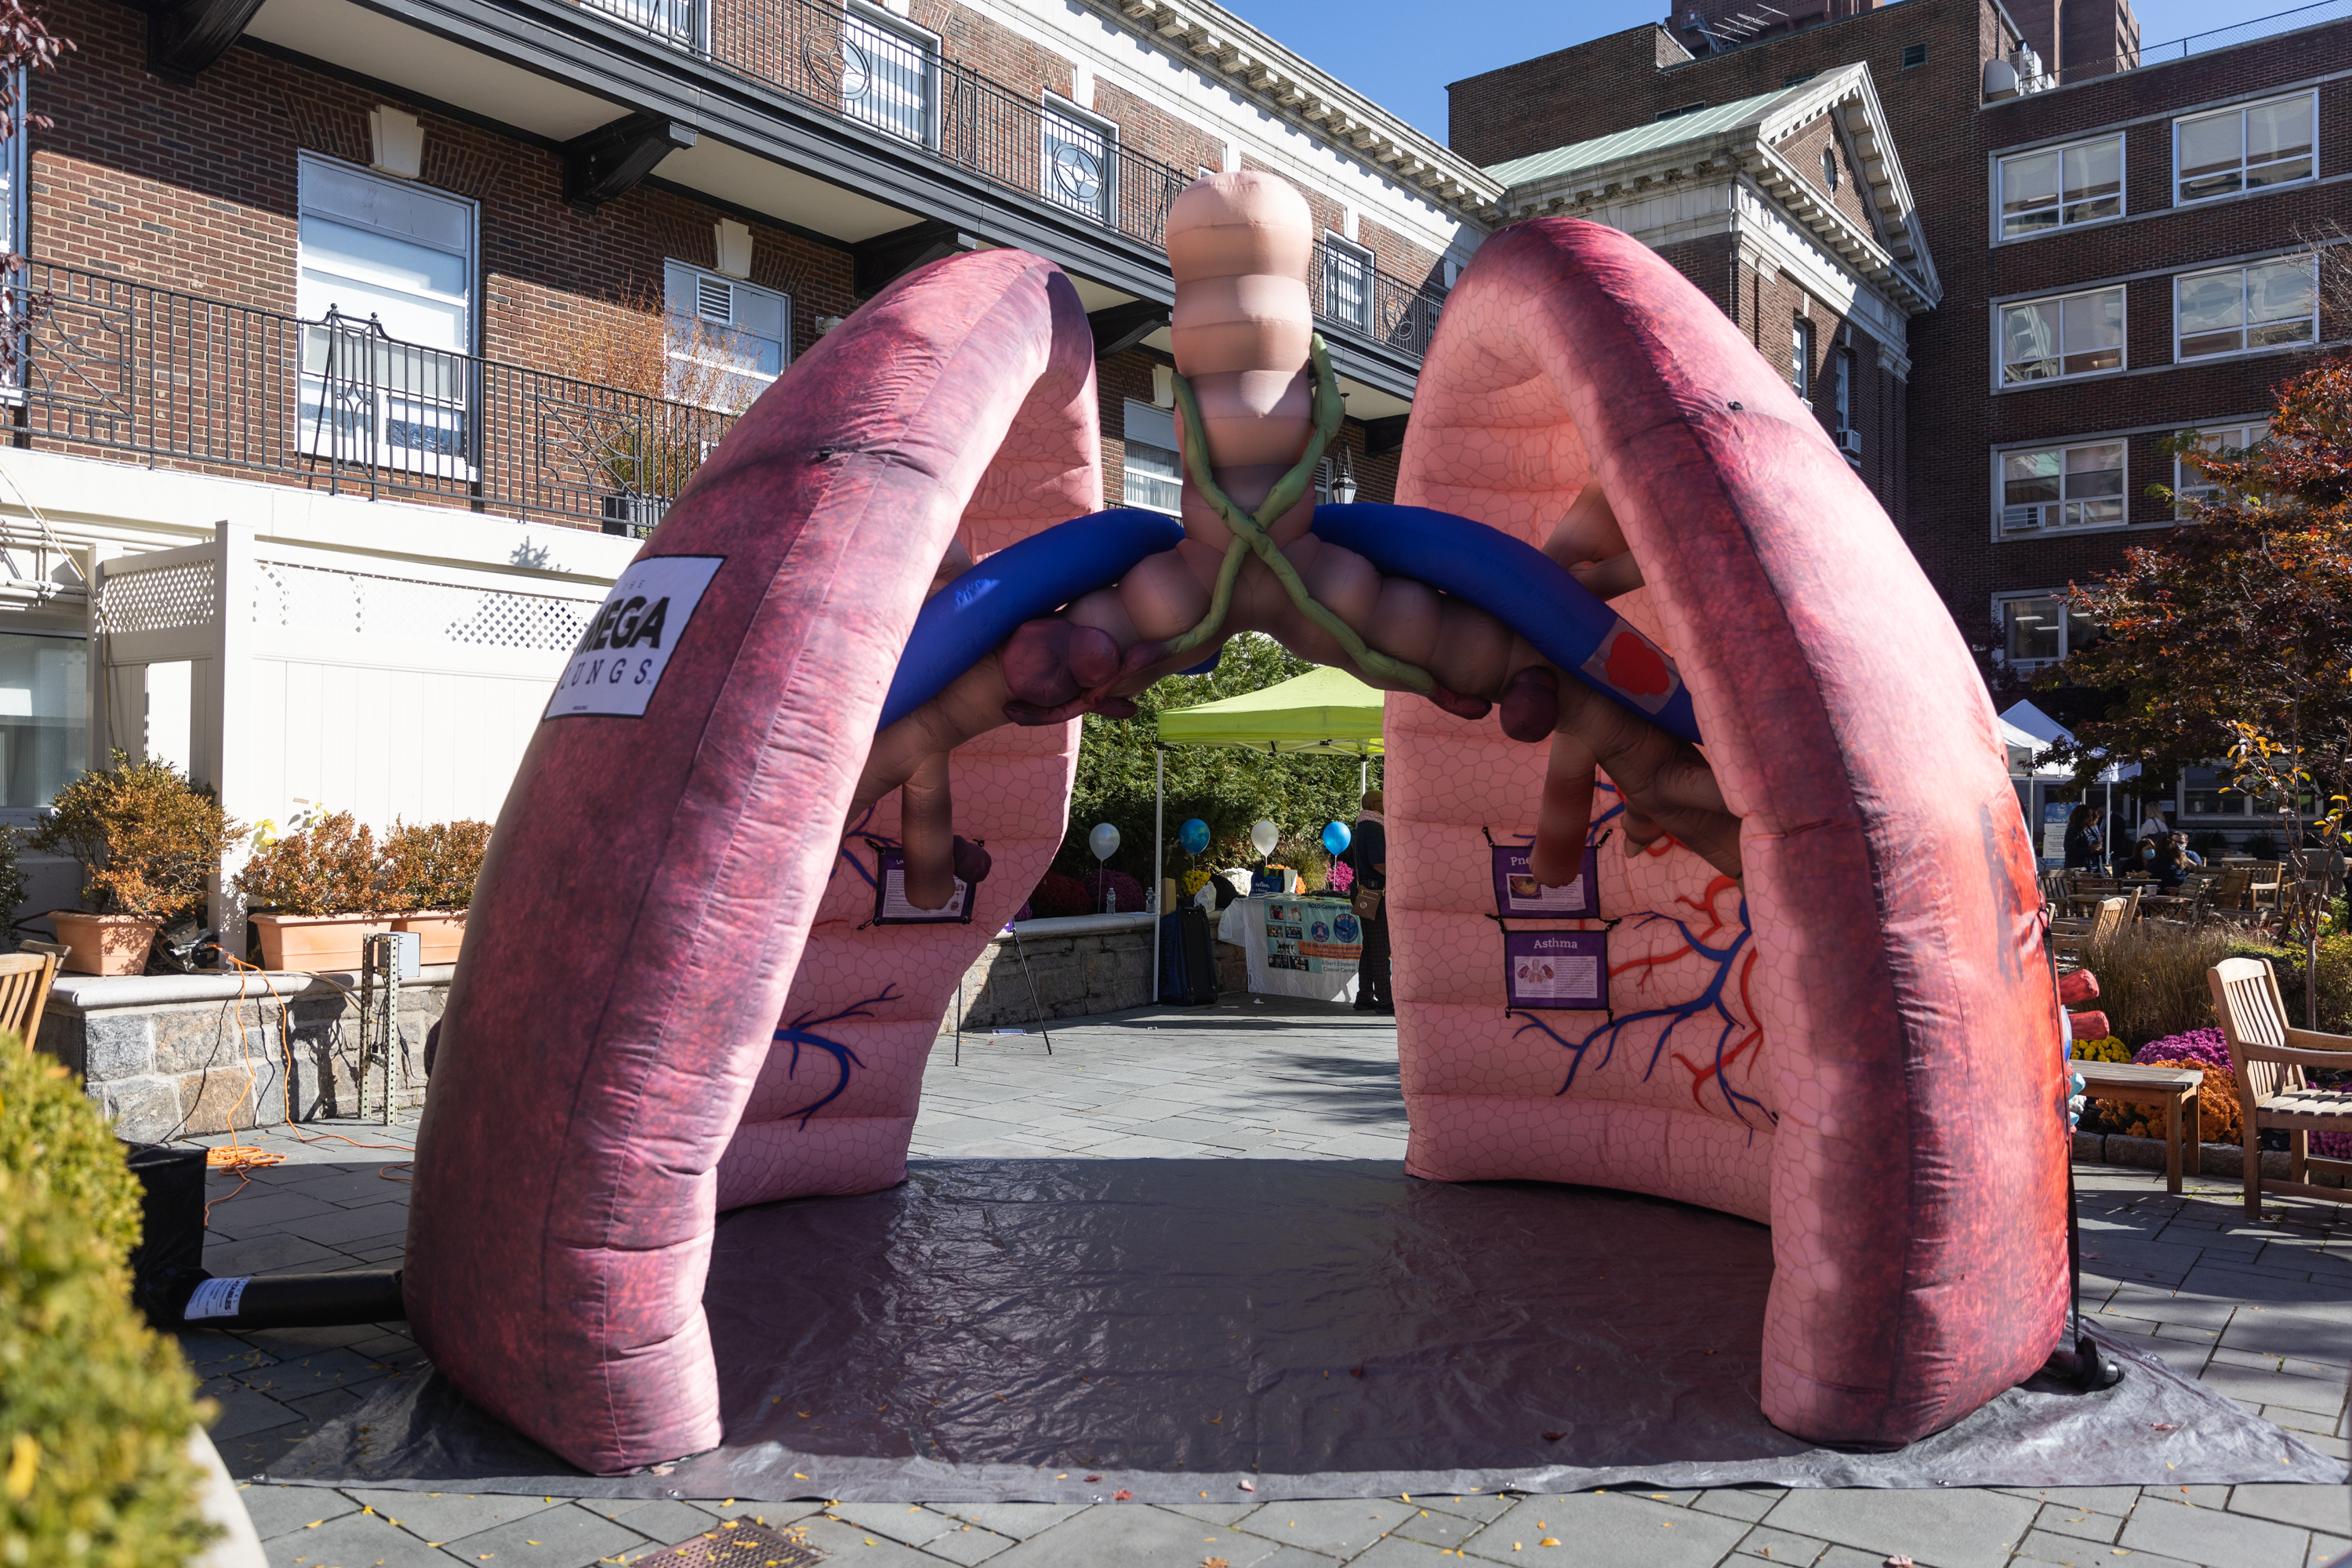 Giant inflatable lungs form an educational pavillion in the hospital courtyard.